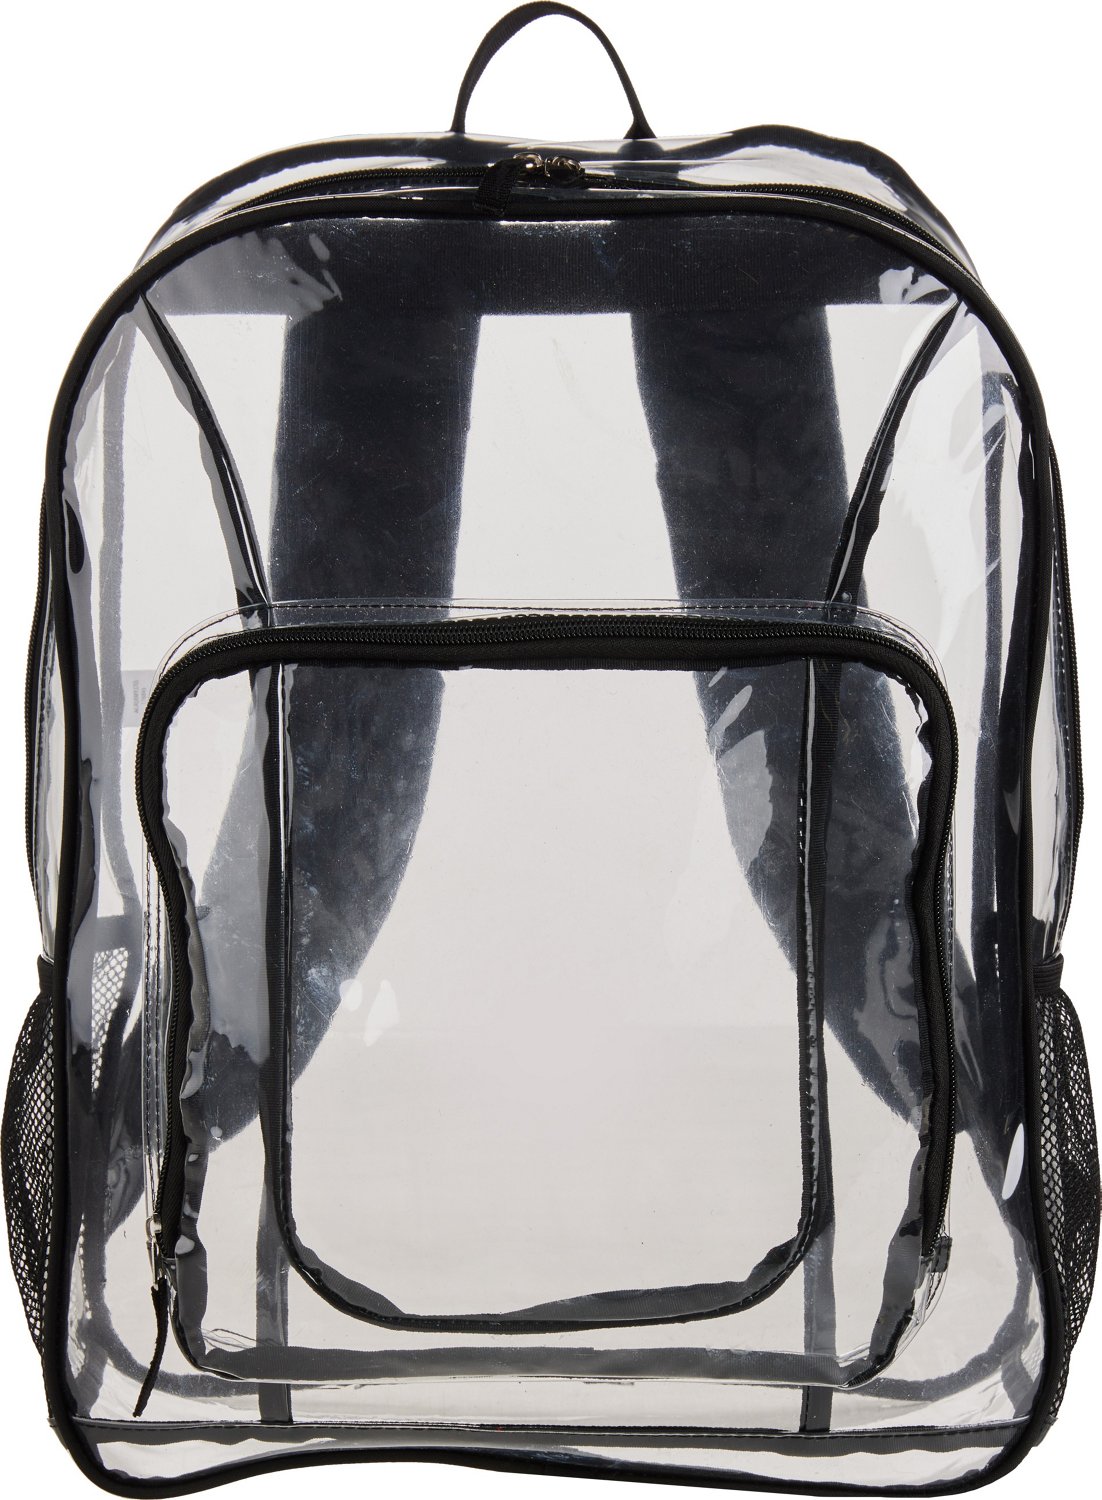 Clear Backpack Heavy Duty Transparent Backpack Ocean